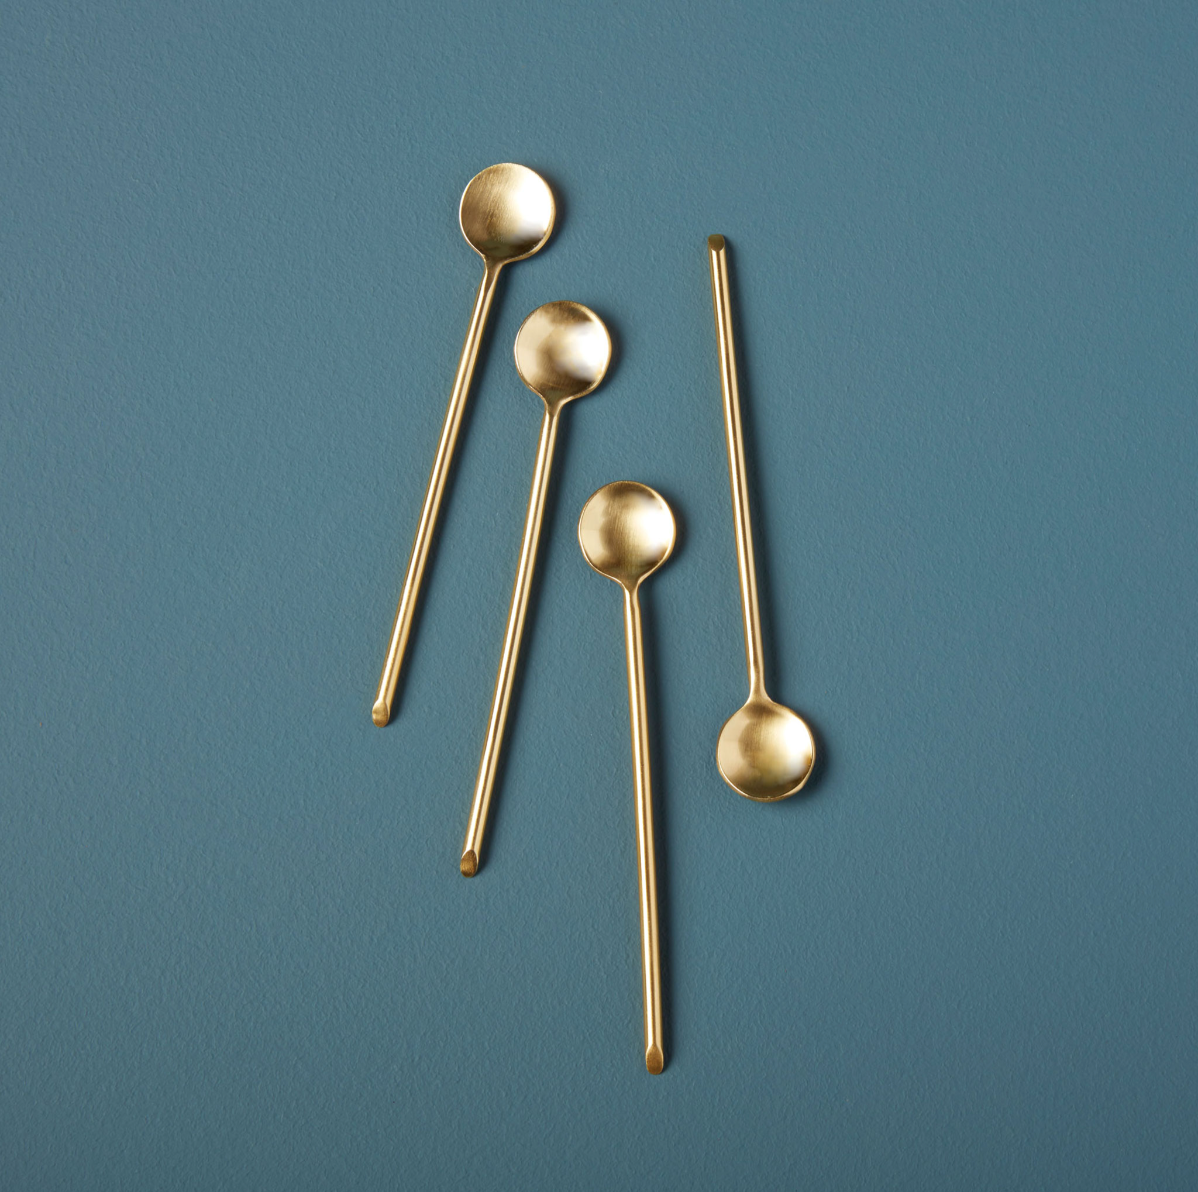 Long Spoons in Gold, Set of 4